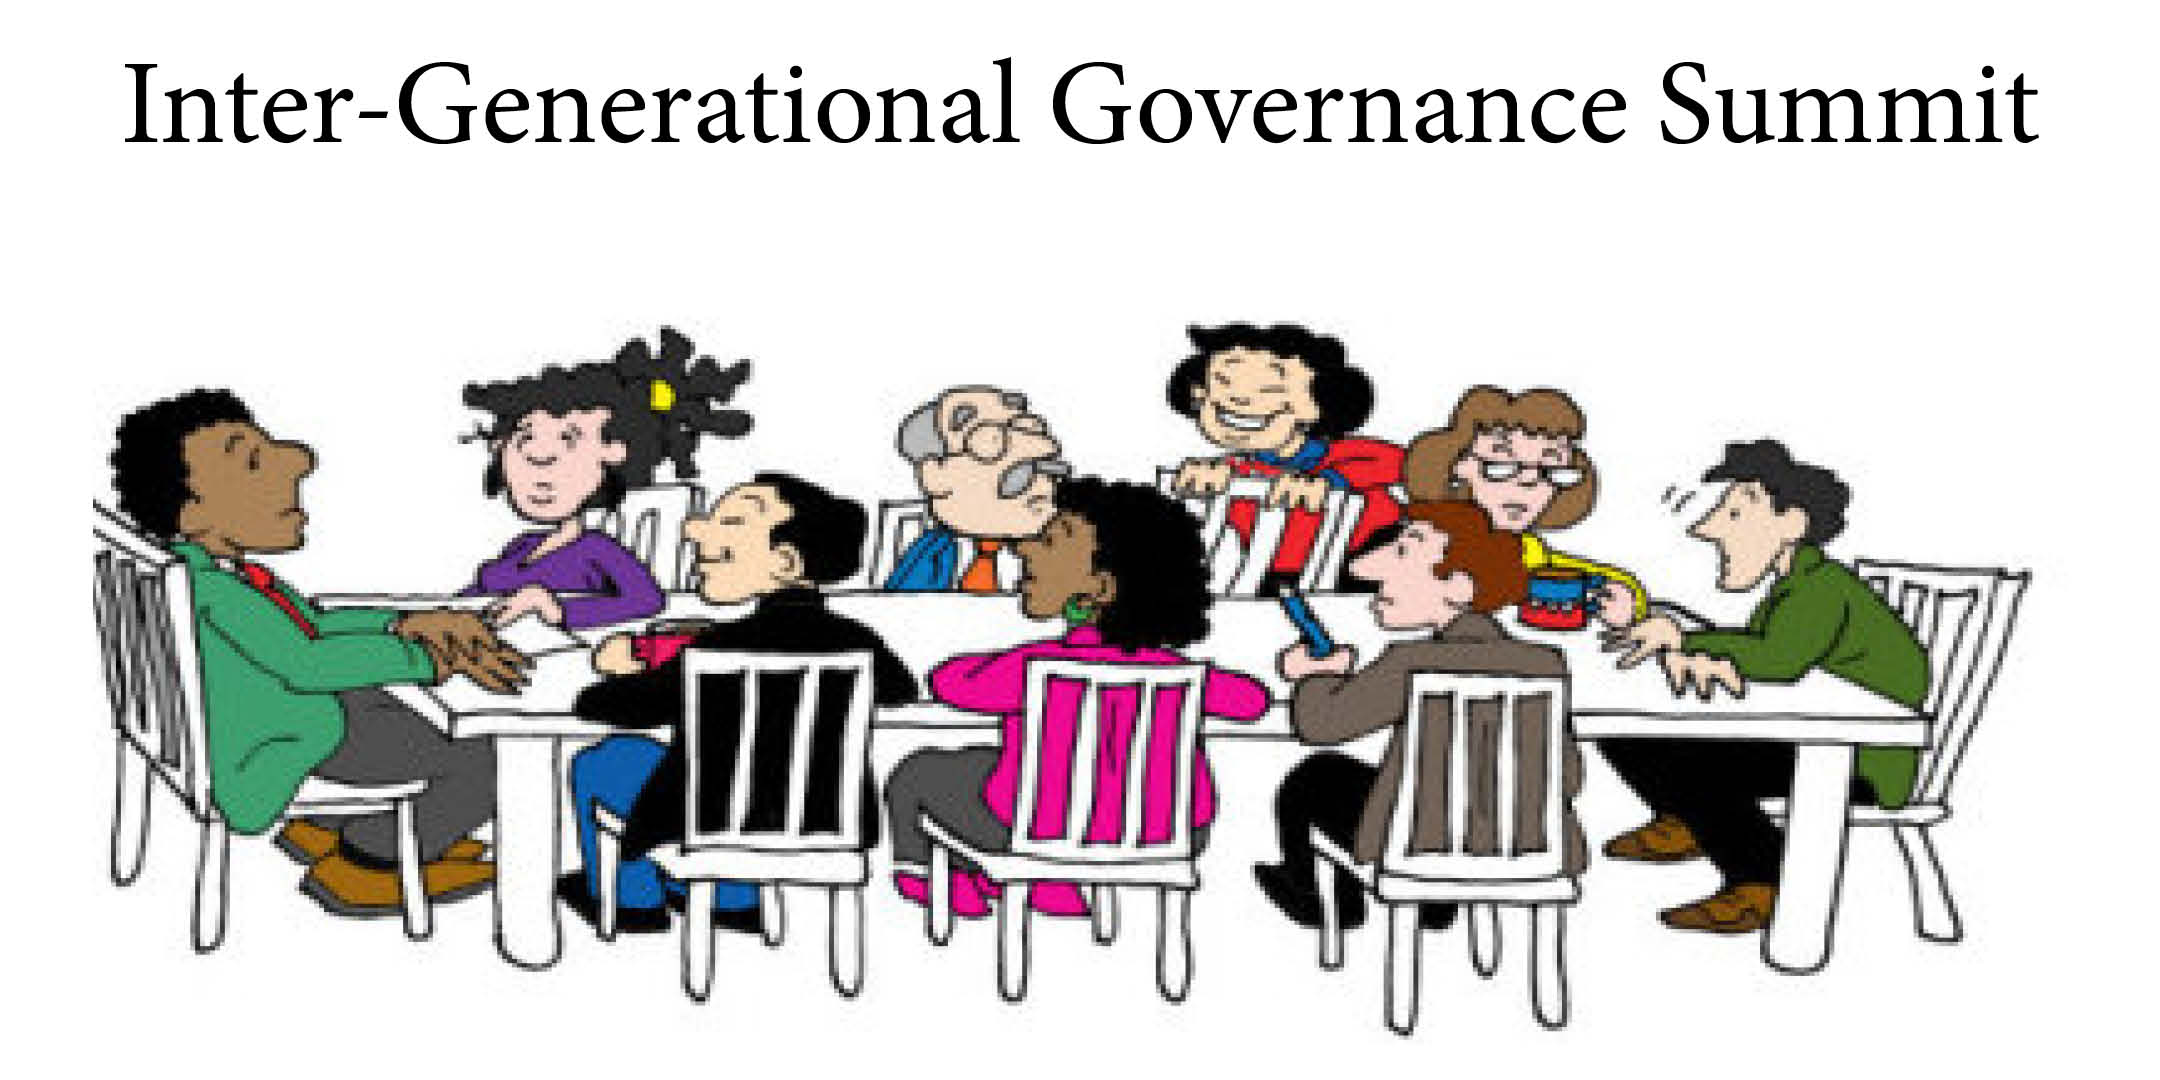 1stSaturdays.com presents “The Intergenerational Governance Summit” – May 4th at Oakland’s City Hall